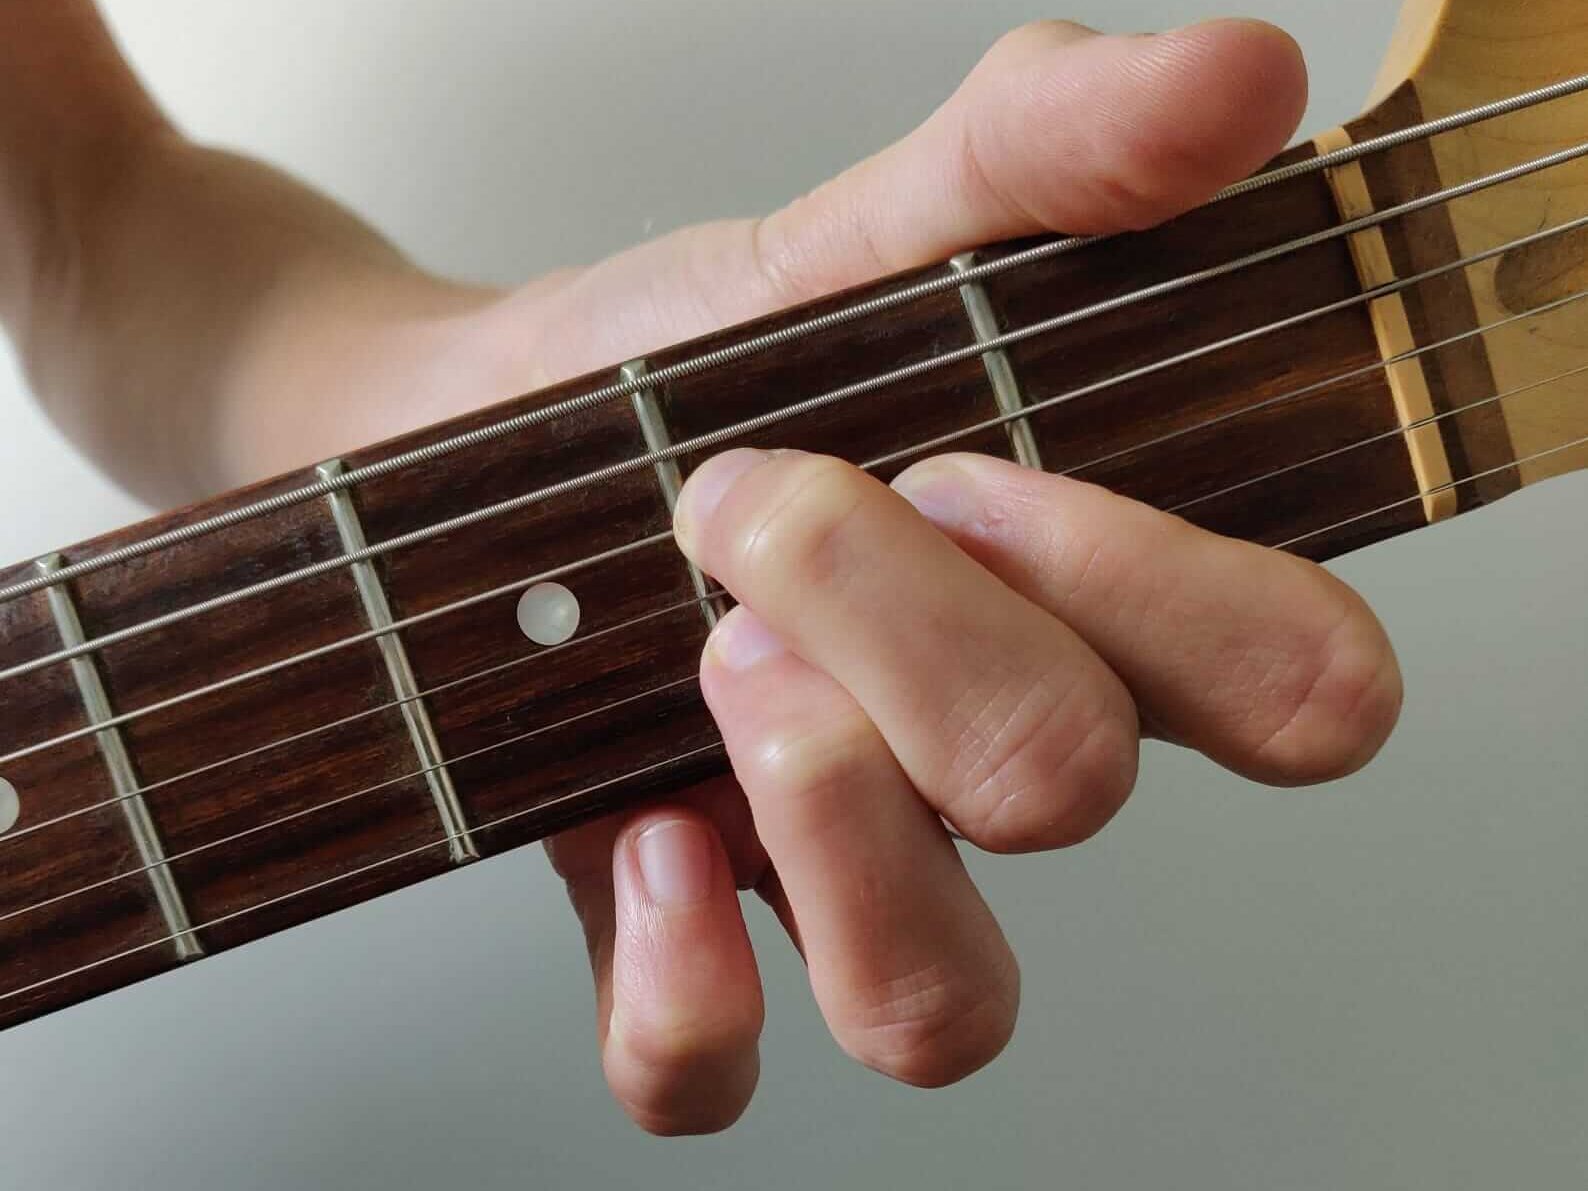 How to play an A major chord